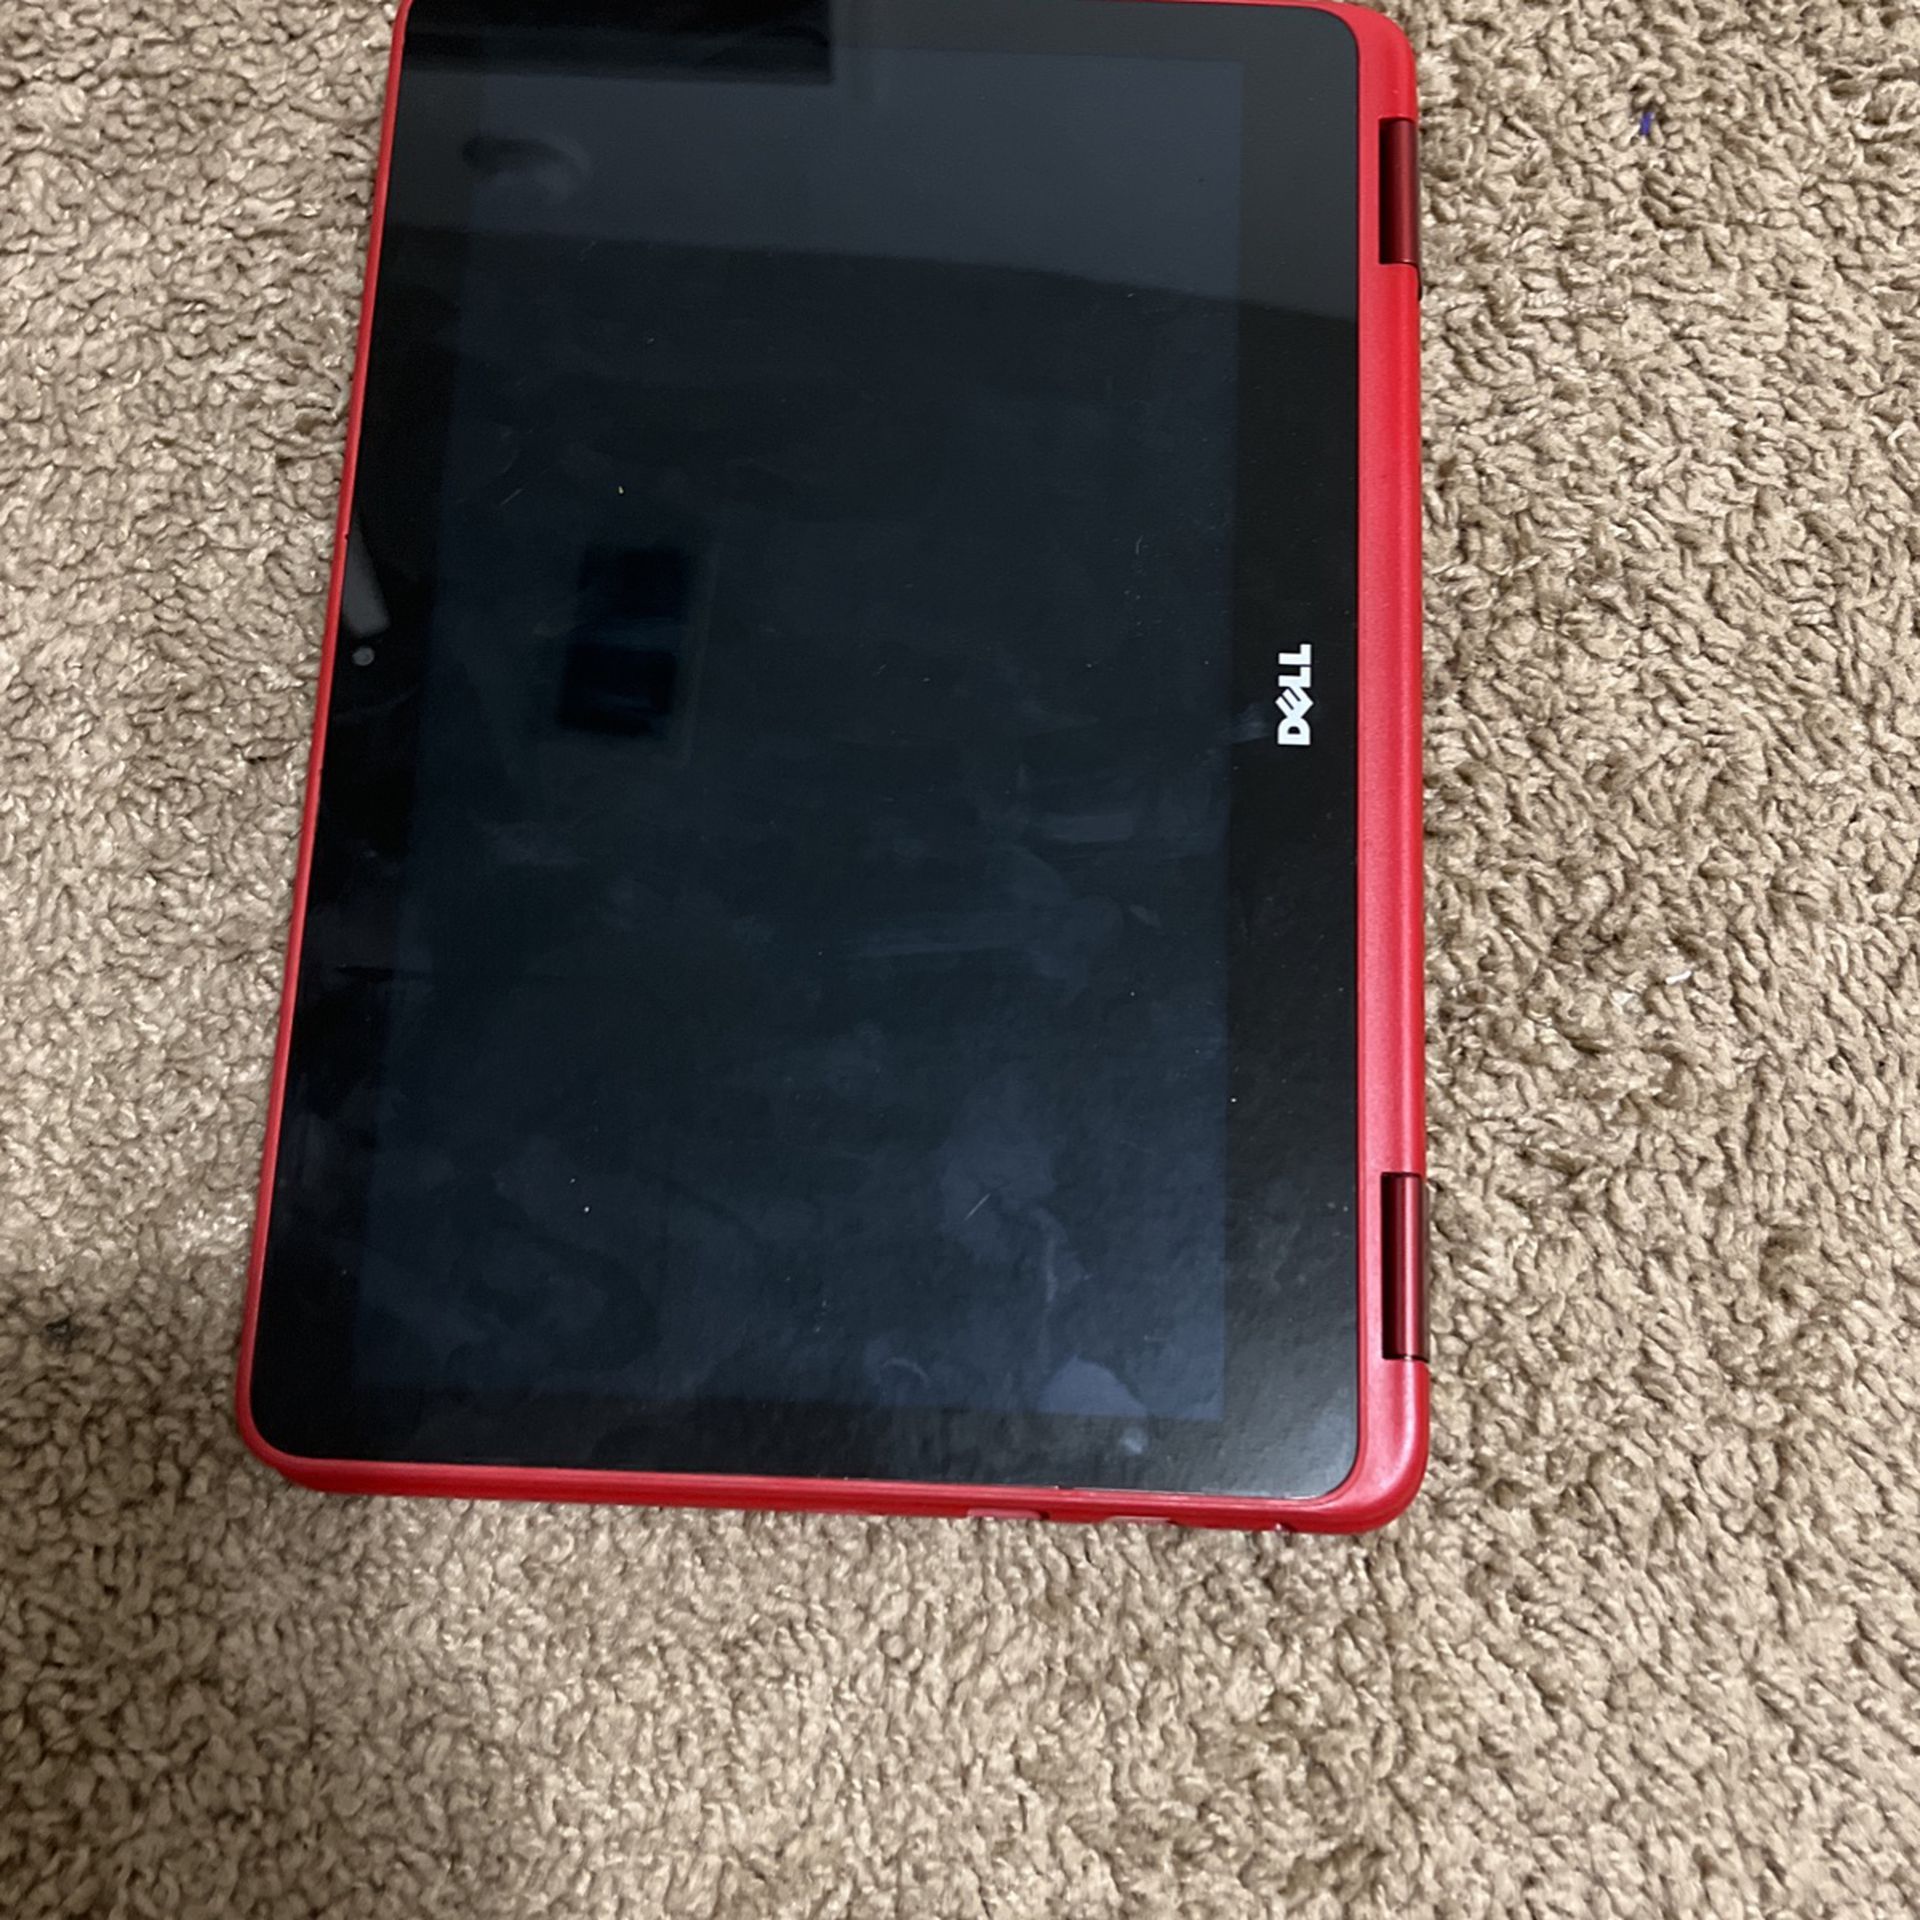 Touchscreen Dell Laptop/tablet